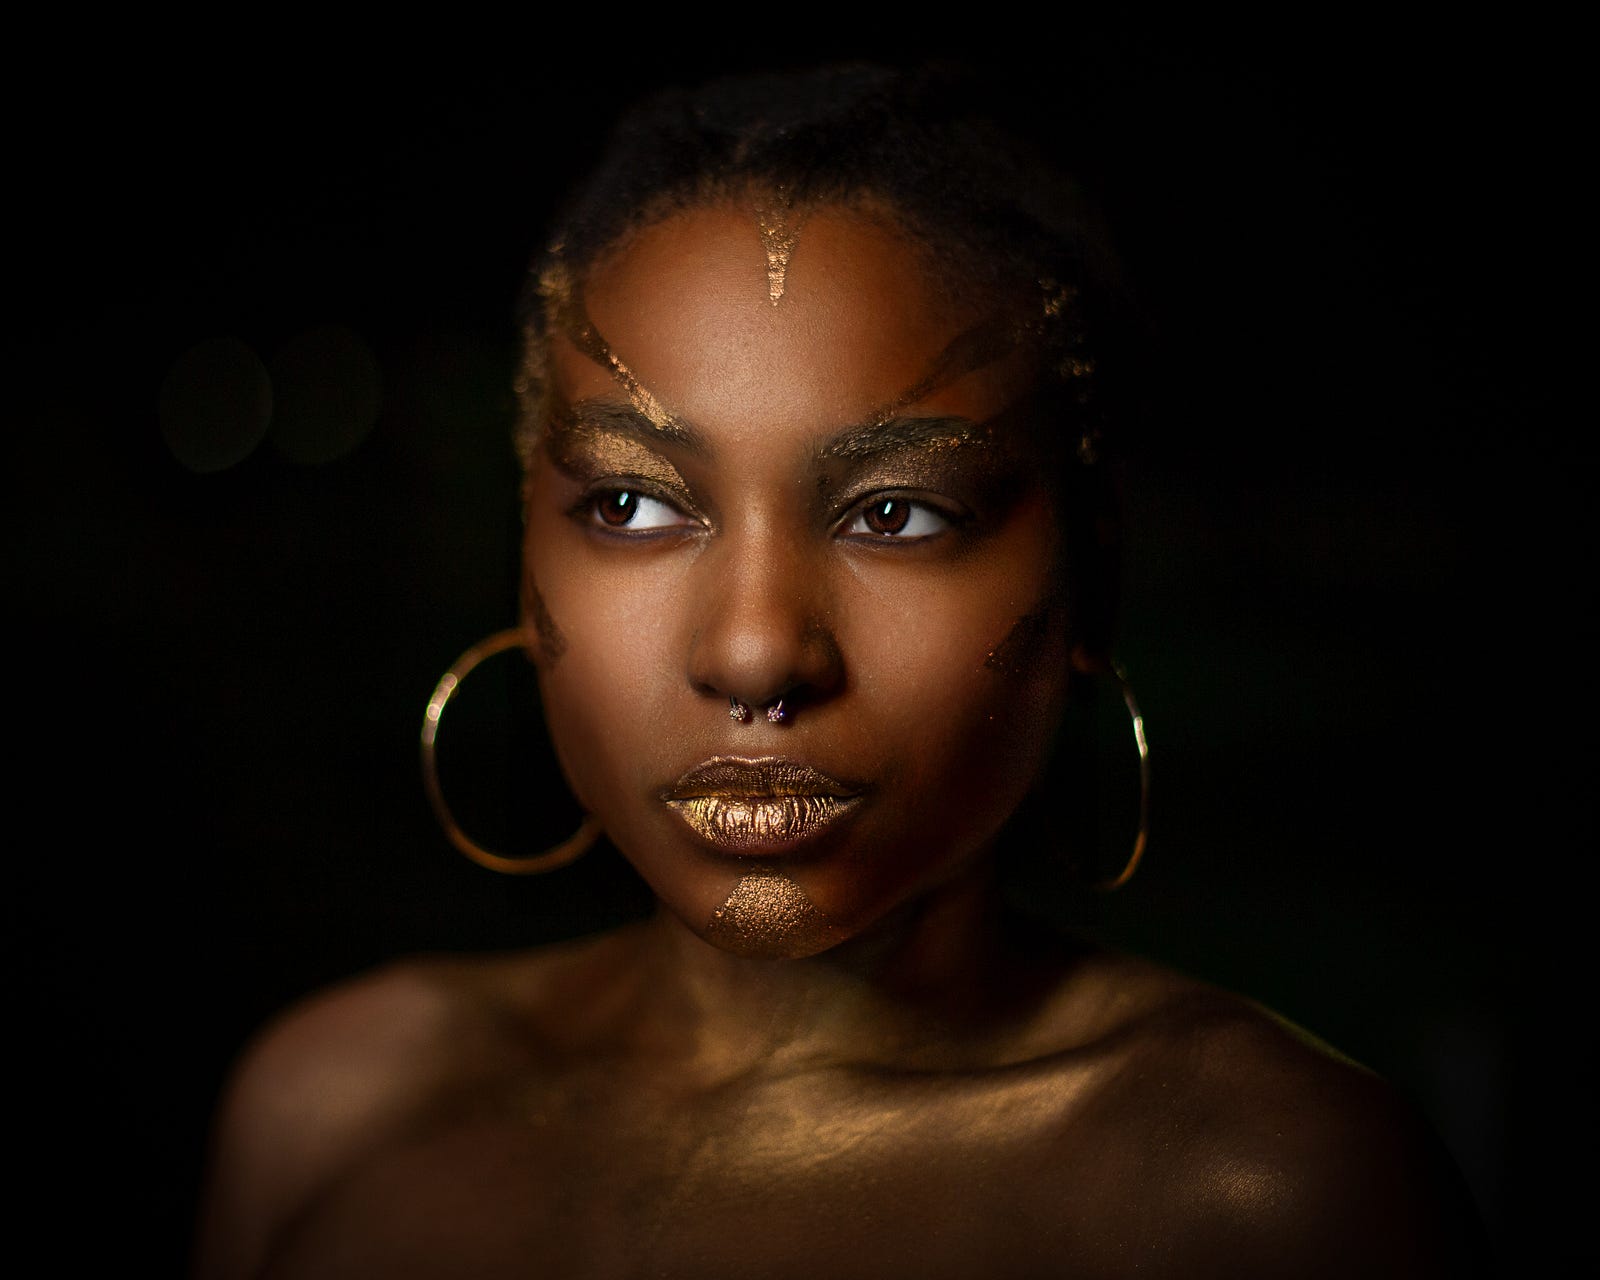 A young black woman in the dark faces us, highlighted by a light. The vast majority of the placebo-controlled studies showed that drinking cranberries as a juice or taking capsules reduced the number of UTIs in women with recurrent cases, children, and people susceptible to infections following medical interventions such as bladder radiotherapy. However, cranberry products did not reduce UTI risk for pregnant women, older adults, or those with bladder emptying problems.